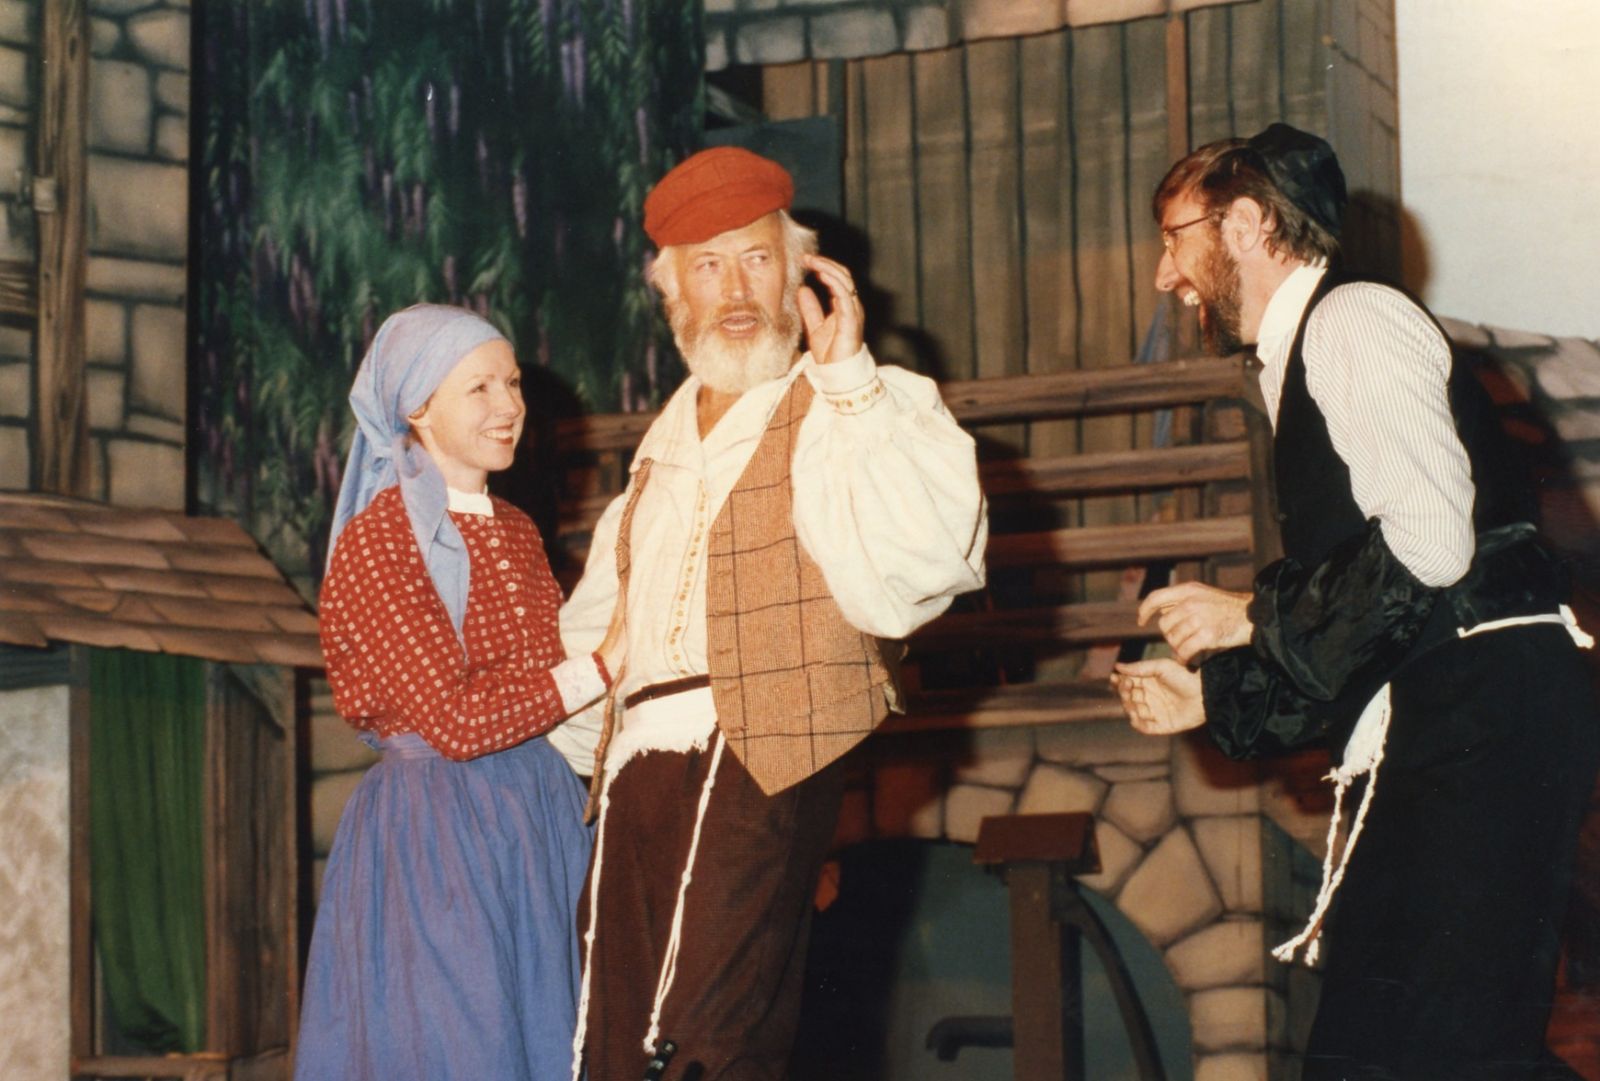 A scene from Fiddler on the Roof, 1991